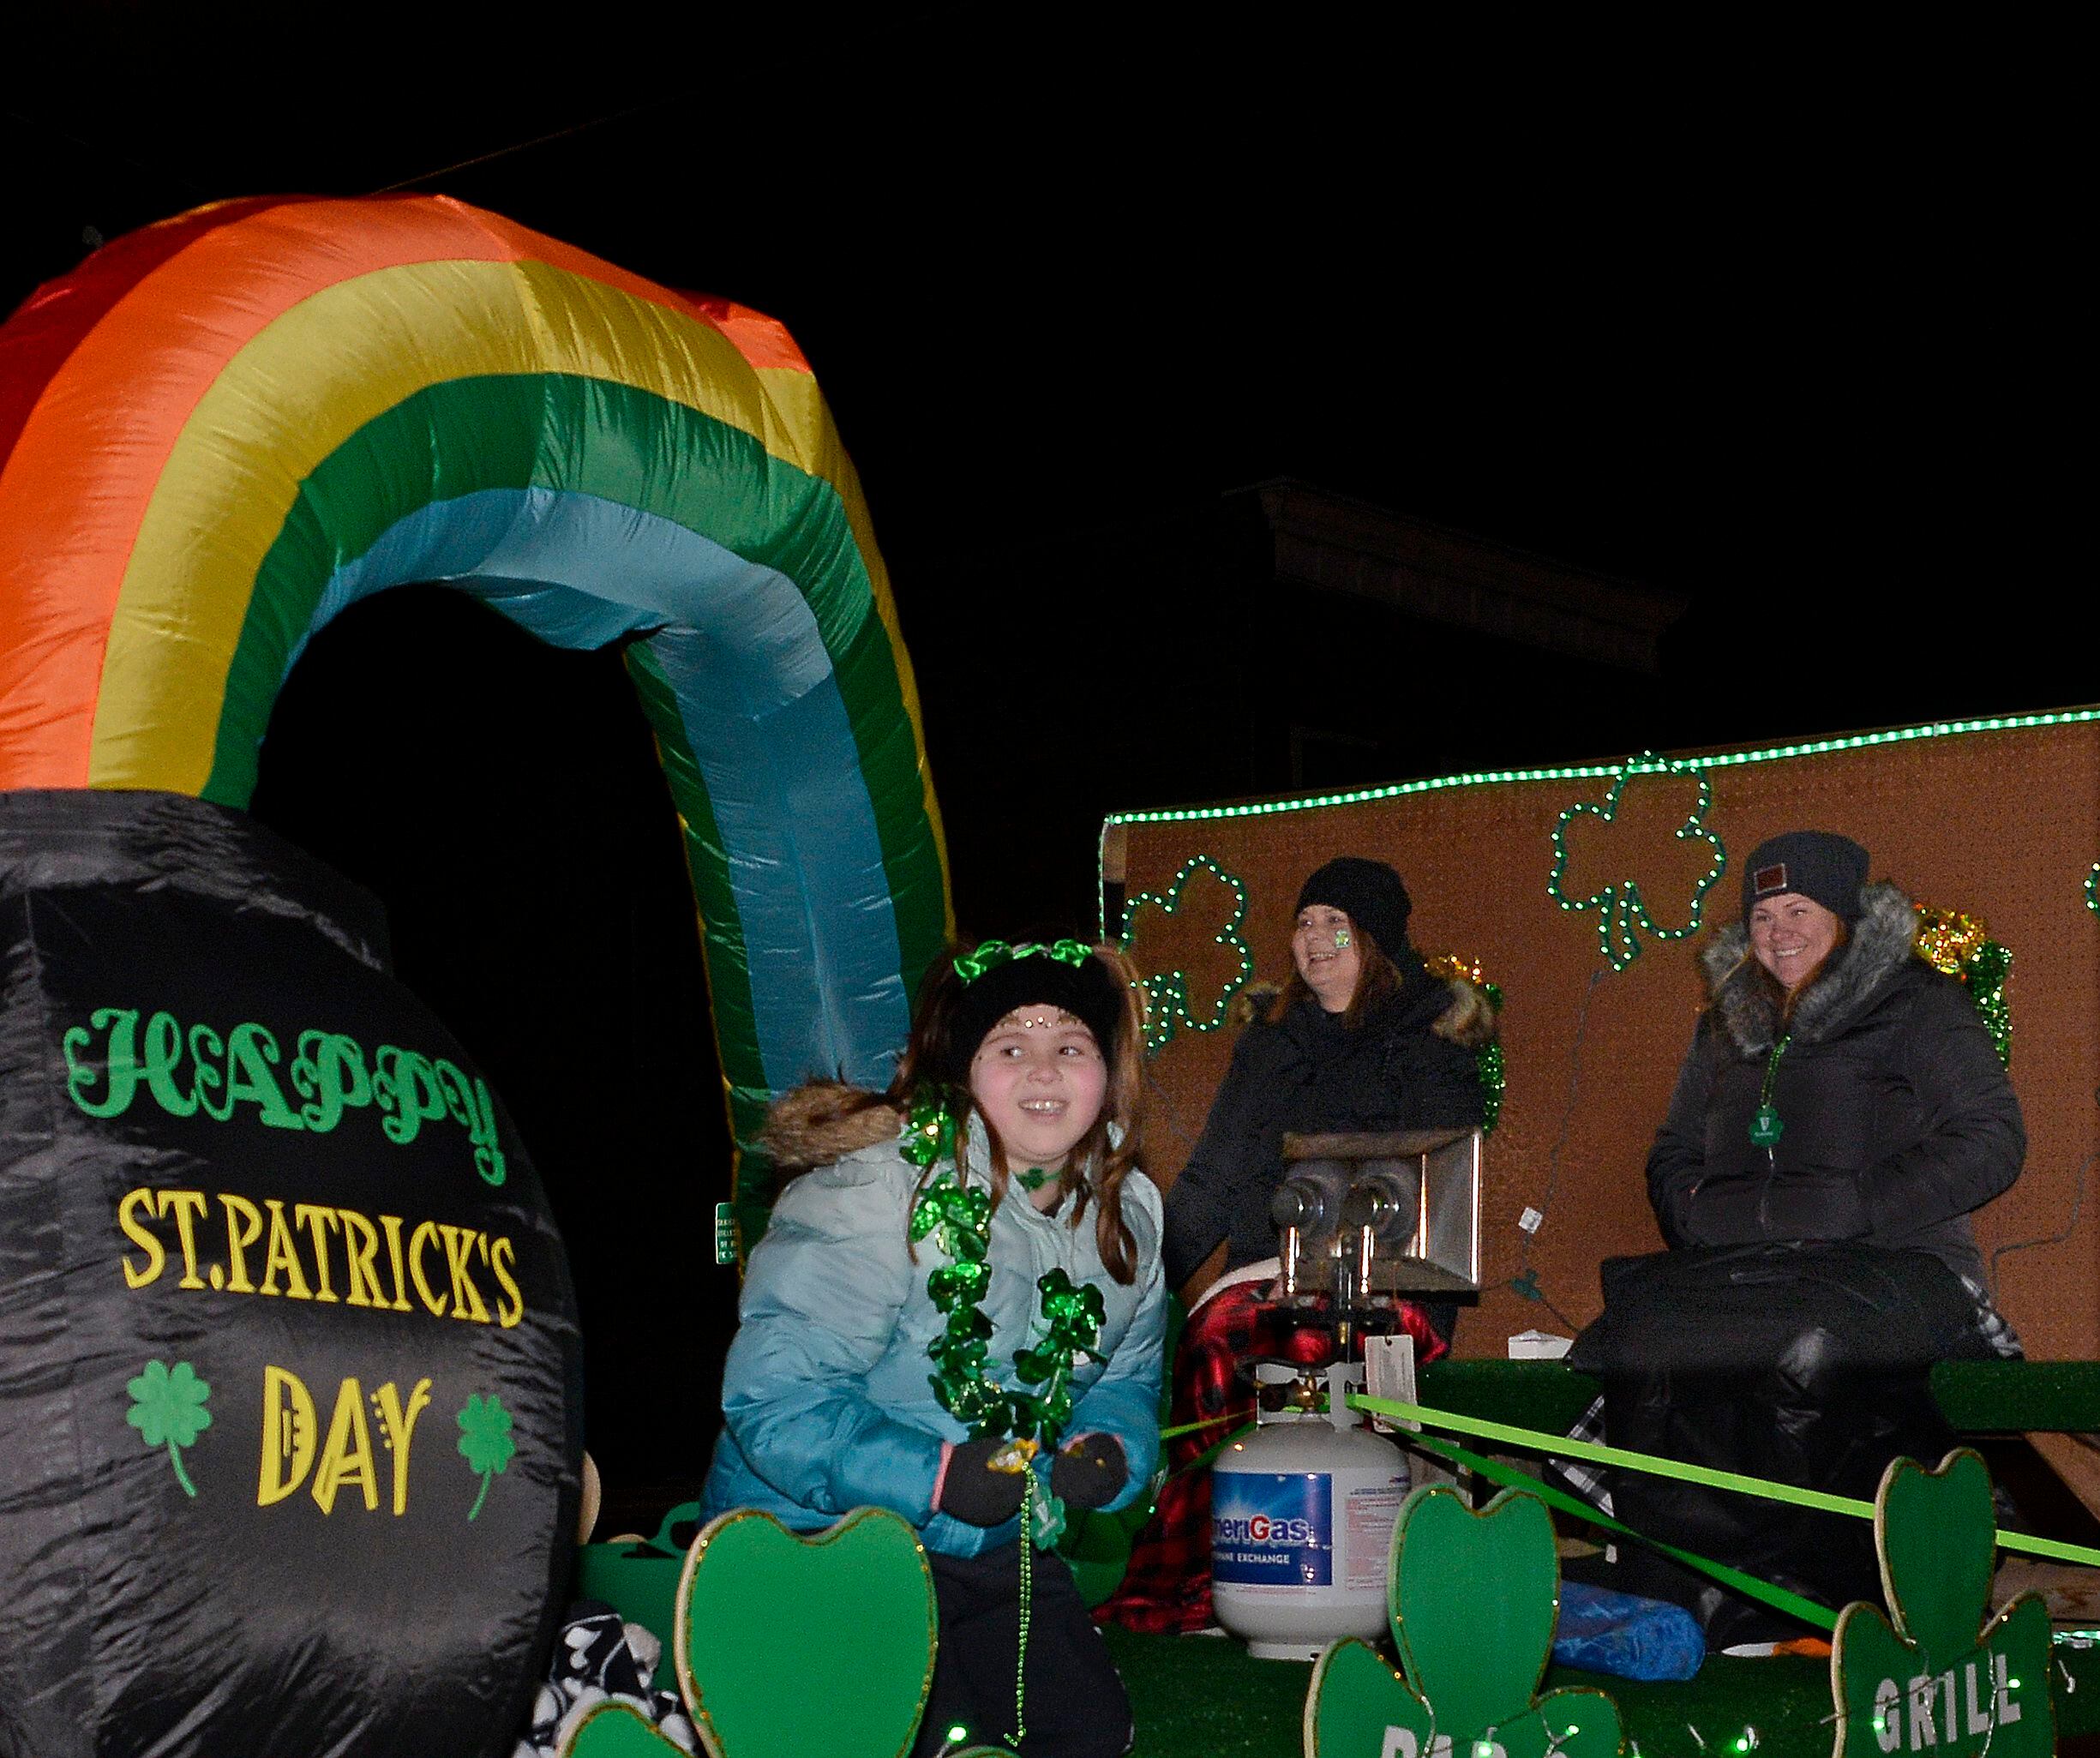 Those riding on the Ziggy’s float work to stay warm during the lighted St Patrick’s Day Parade Saturday, March 12, 2022, in Marseilles.